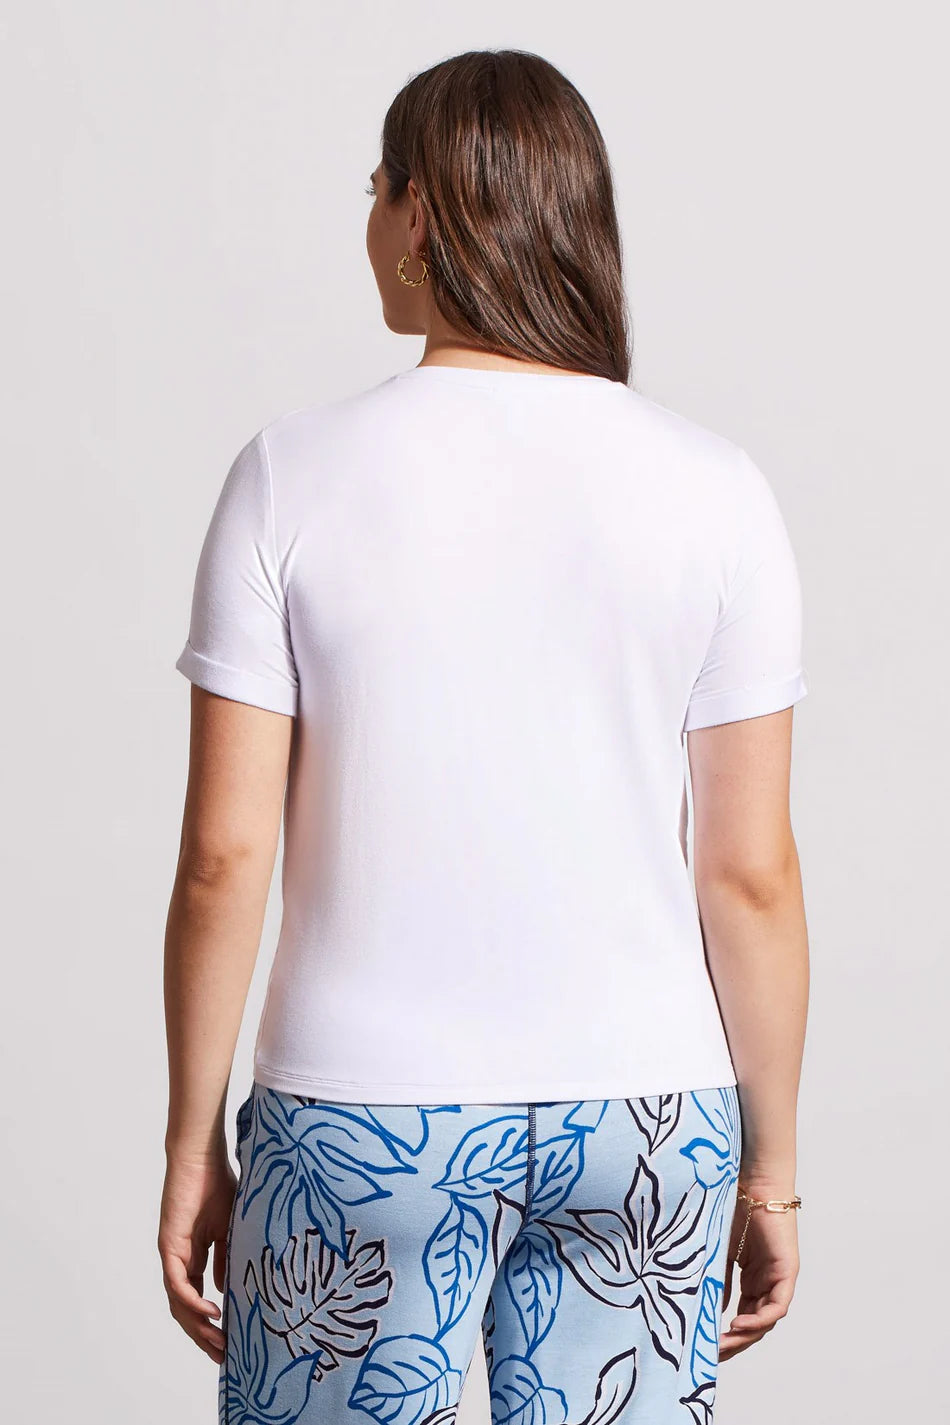 Tribal Front Knot Tee - White